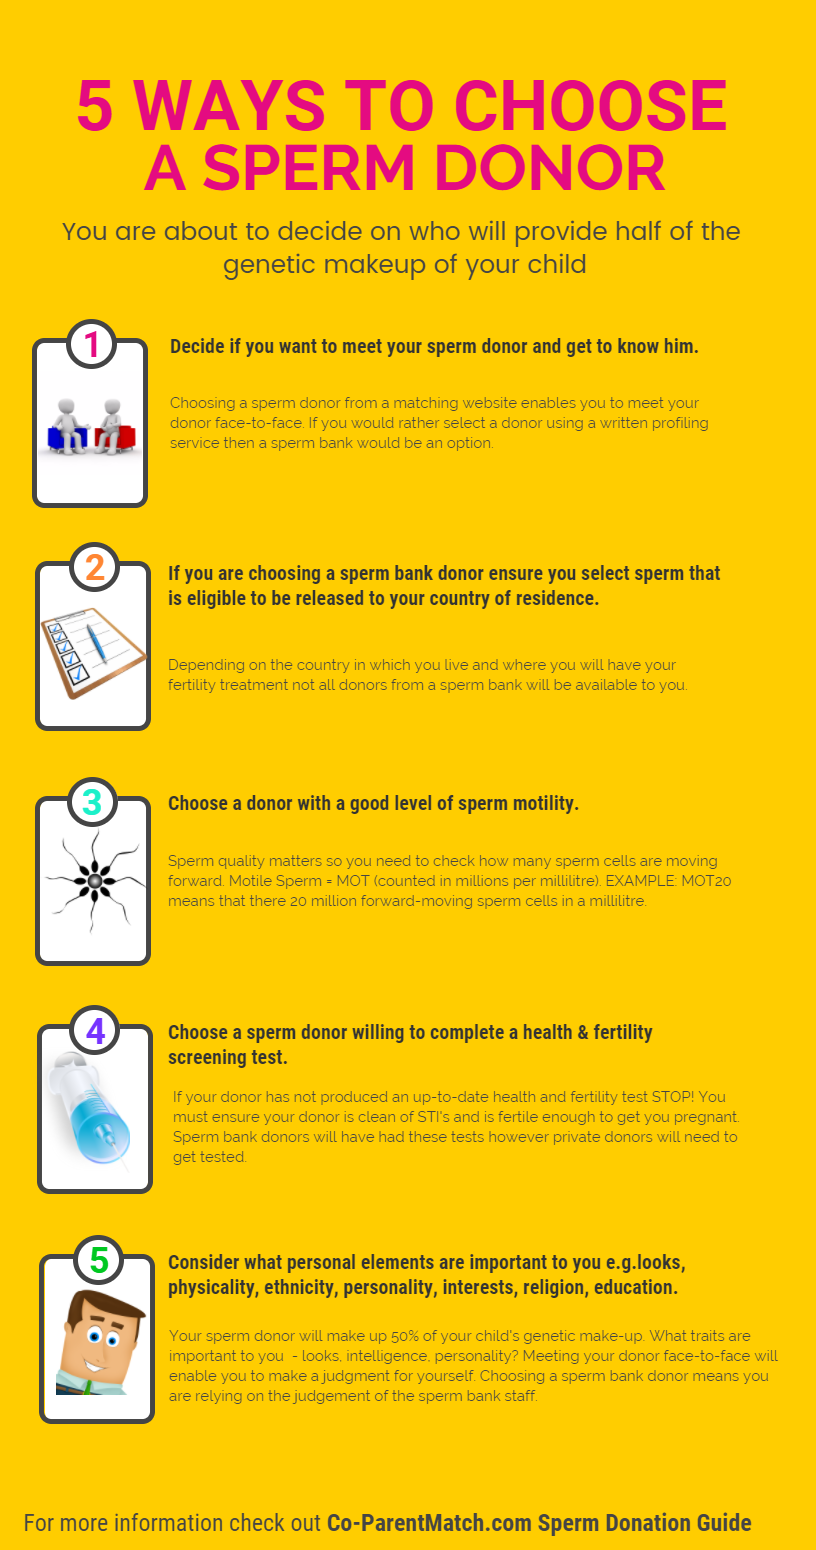 5 ways to choose a sperm donor infographic